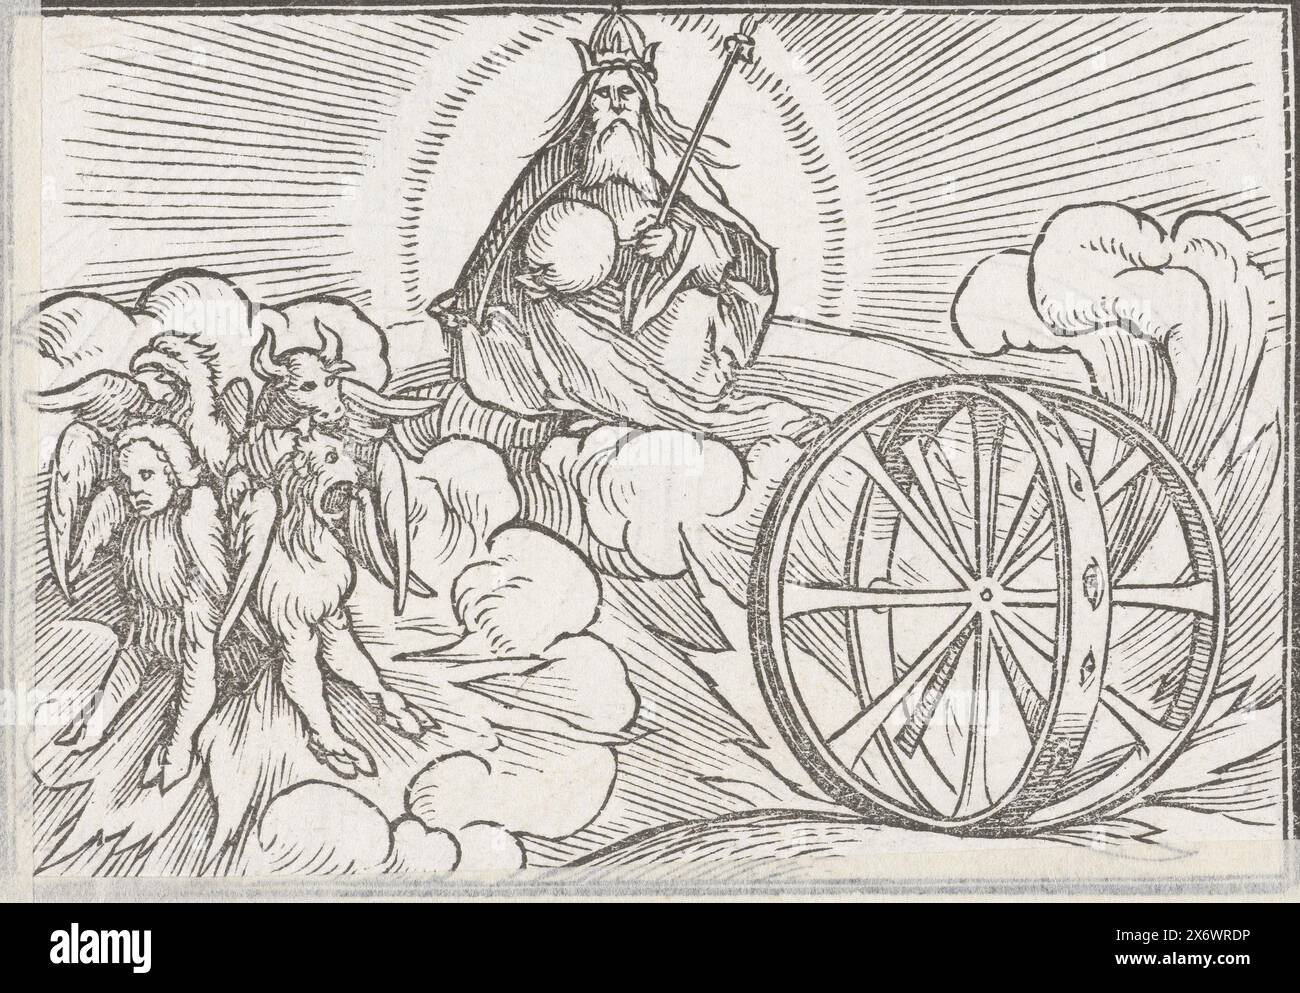 Vision of Ezekiel with God and symbols of four evangelists, The vision of Ezekiel with God enthroned in a halo, globe and scepter in his hands. On the left float the creatures that symbolize the four evangelists, a lion, bull, eagle and angel. They are depicted in fiery light, flames shoot out of the clouds. On the right stands between flames the wheel in a wheel with eyes on the rims Stock Photo